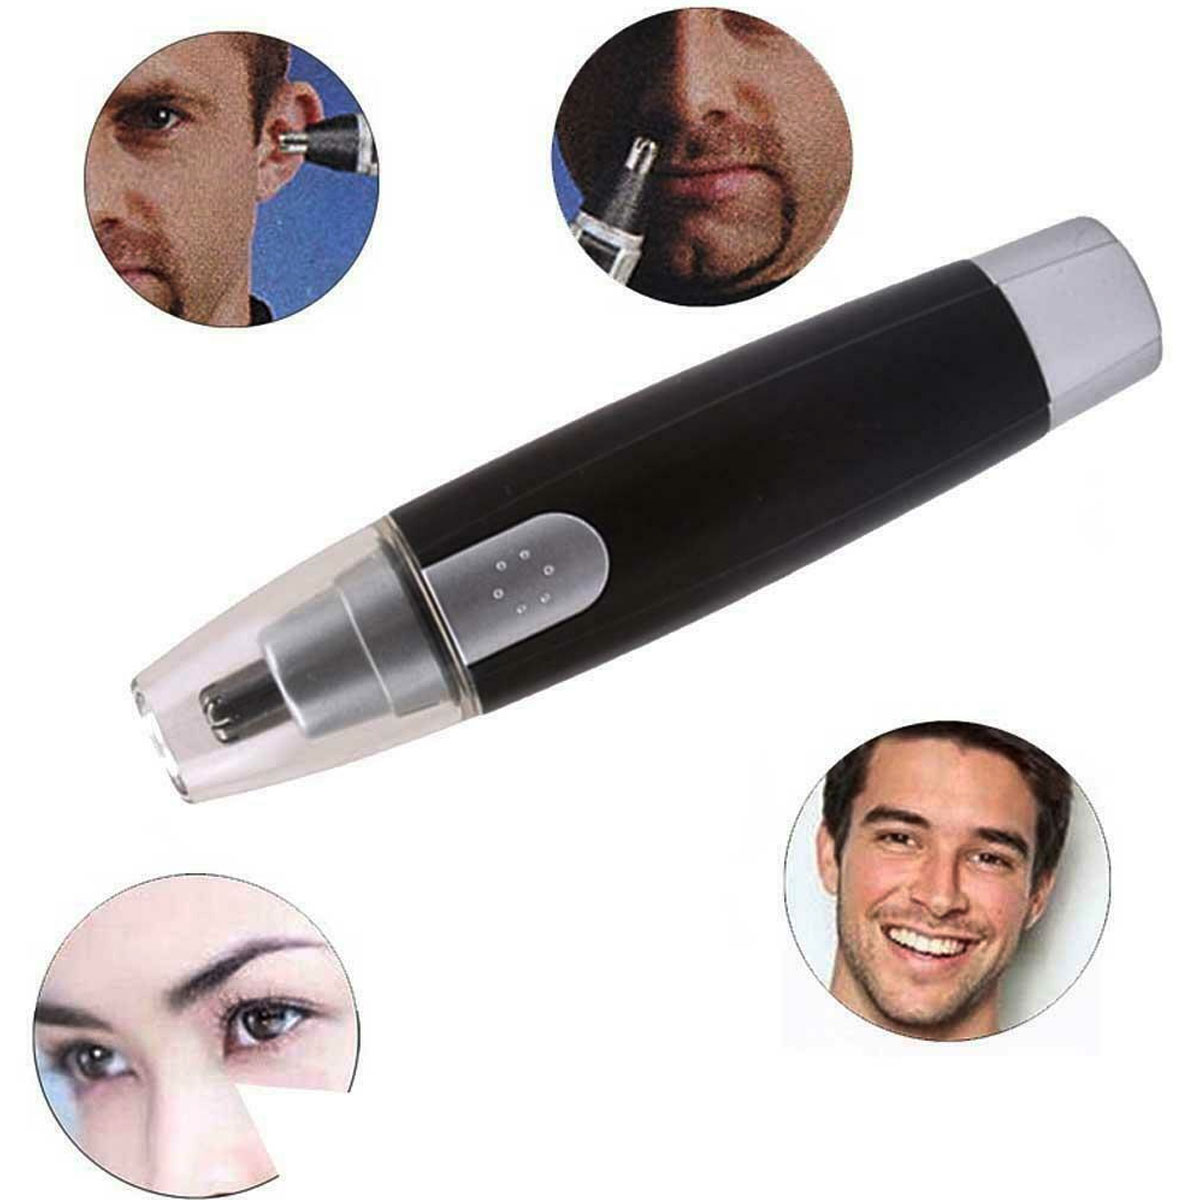 Personal-Trimmer-Nose-Hair-Ear-Eyebrow-Neck-Remover-Groomer-Micro-Shaver-Touch-1606035-5